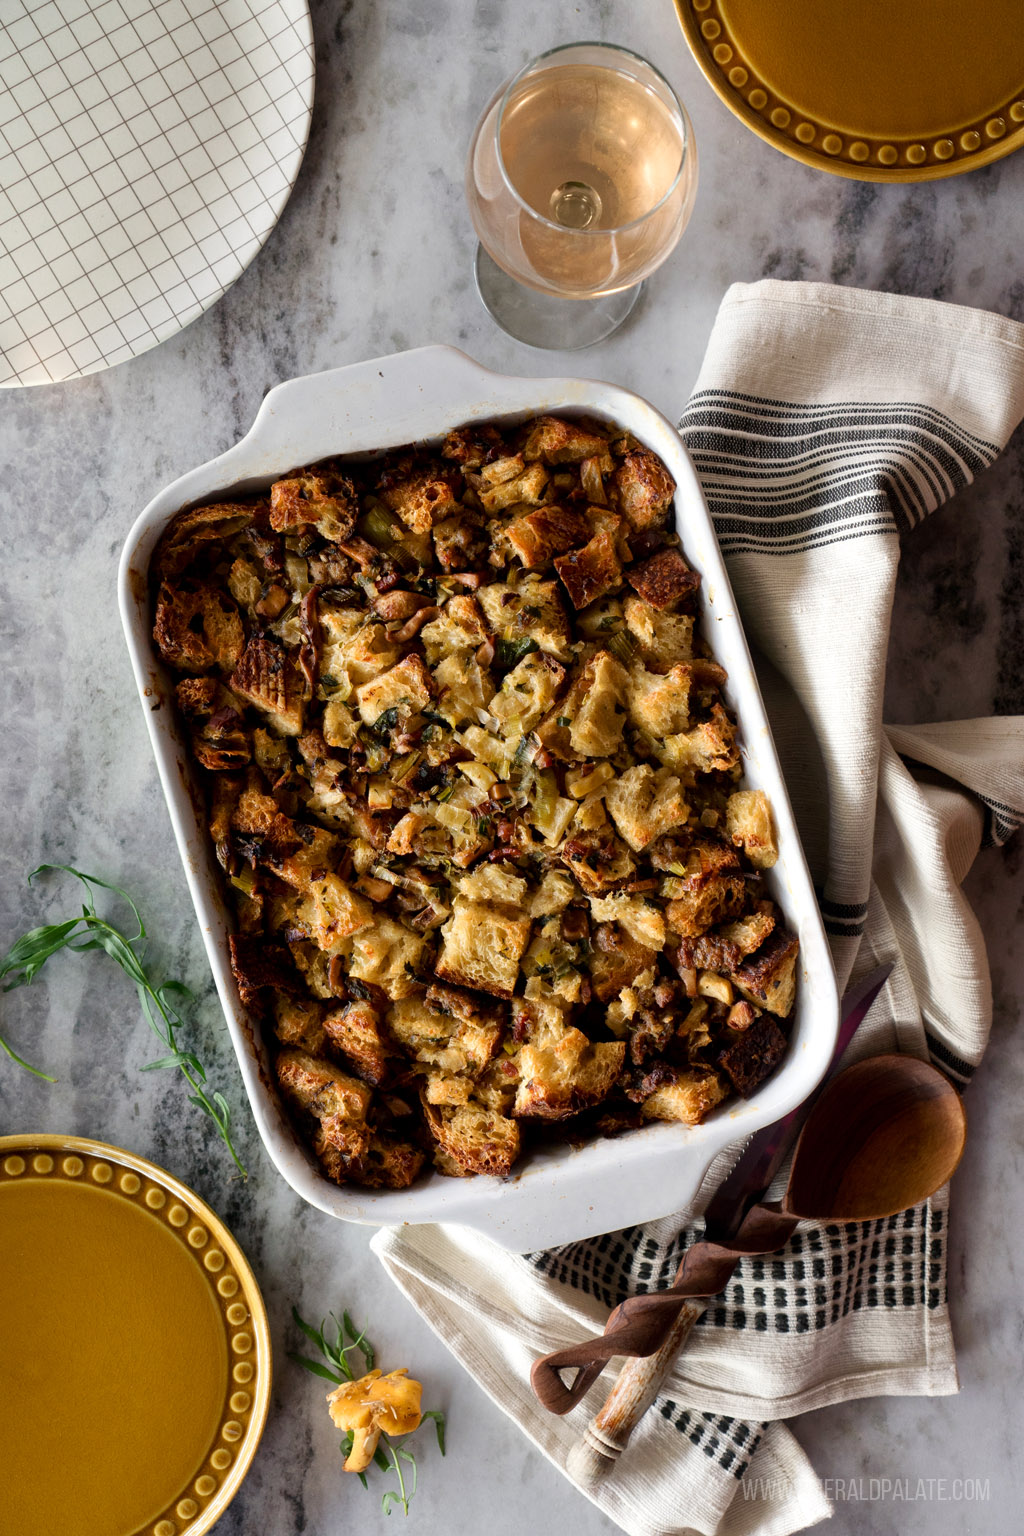 baked dish of Thanksgiving stuffing with sausage